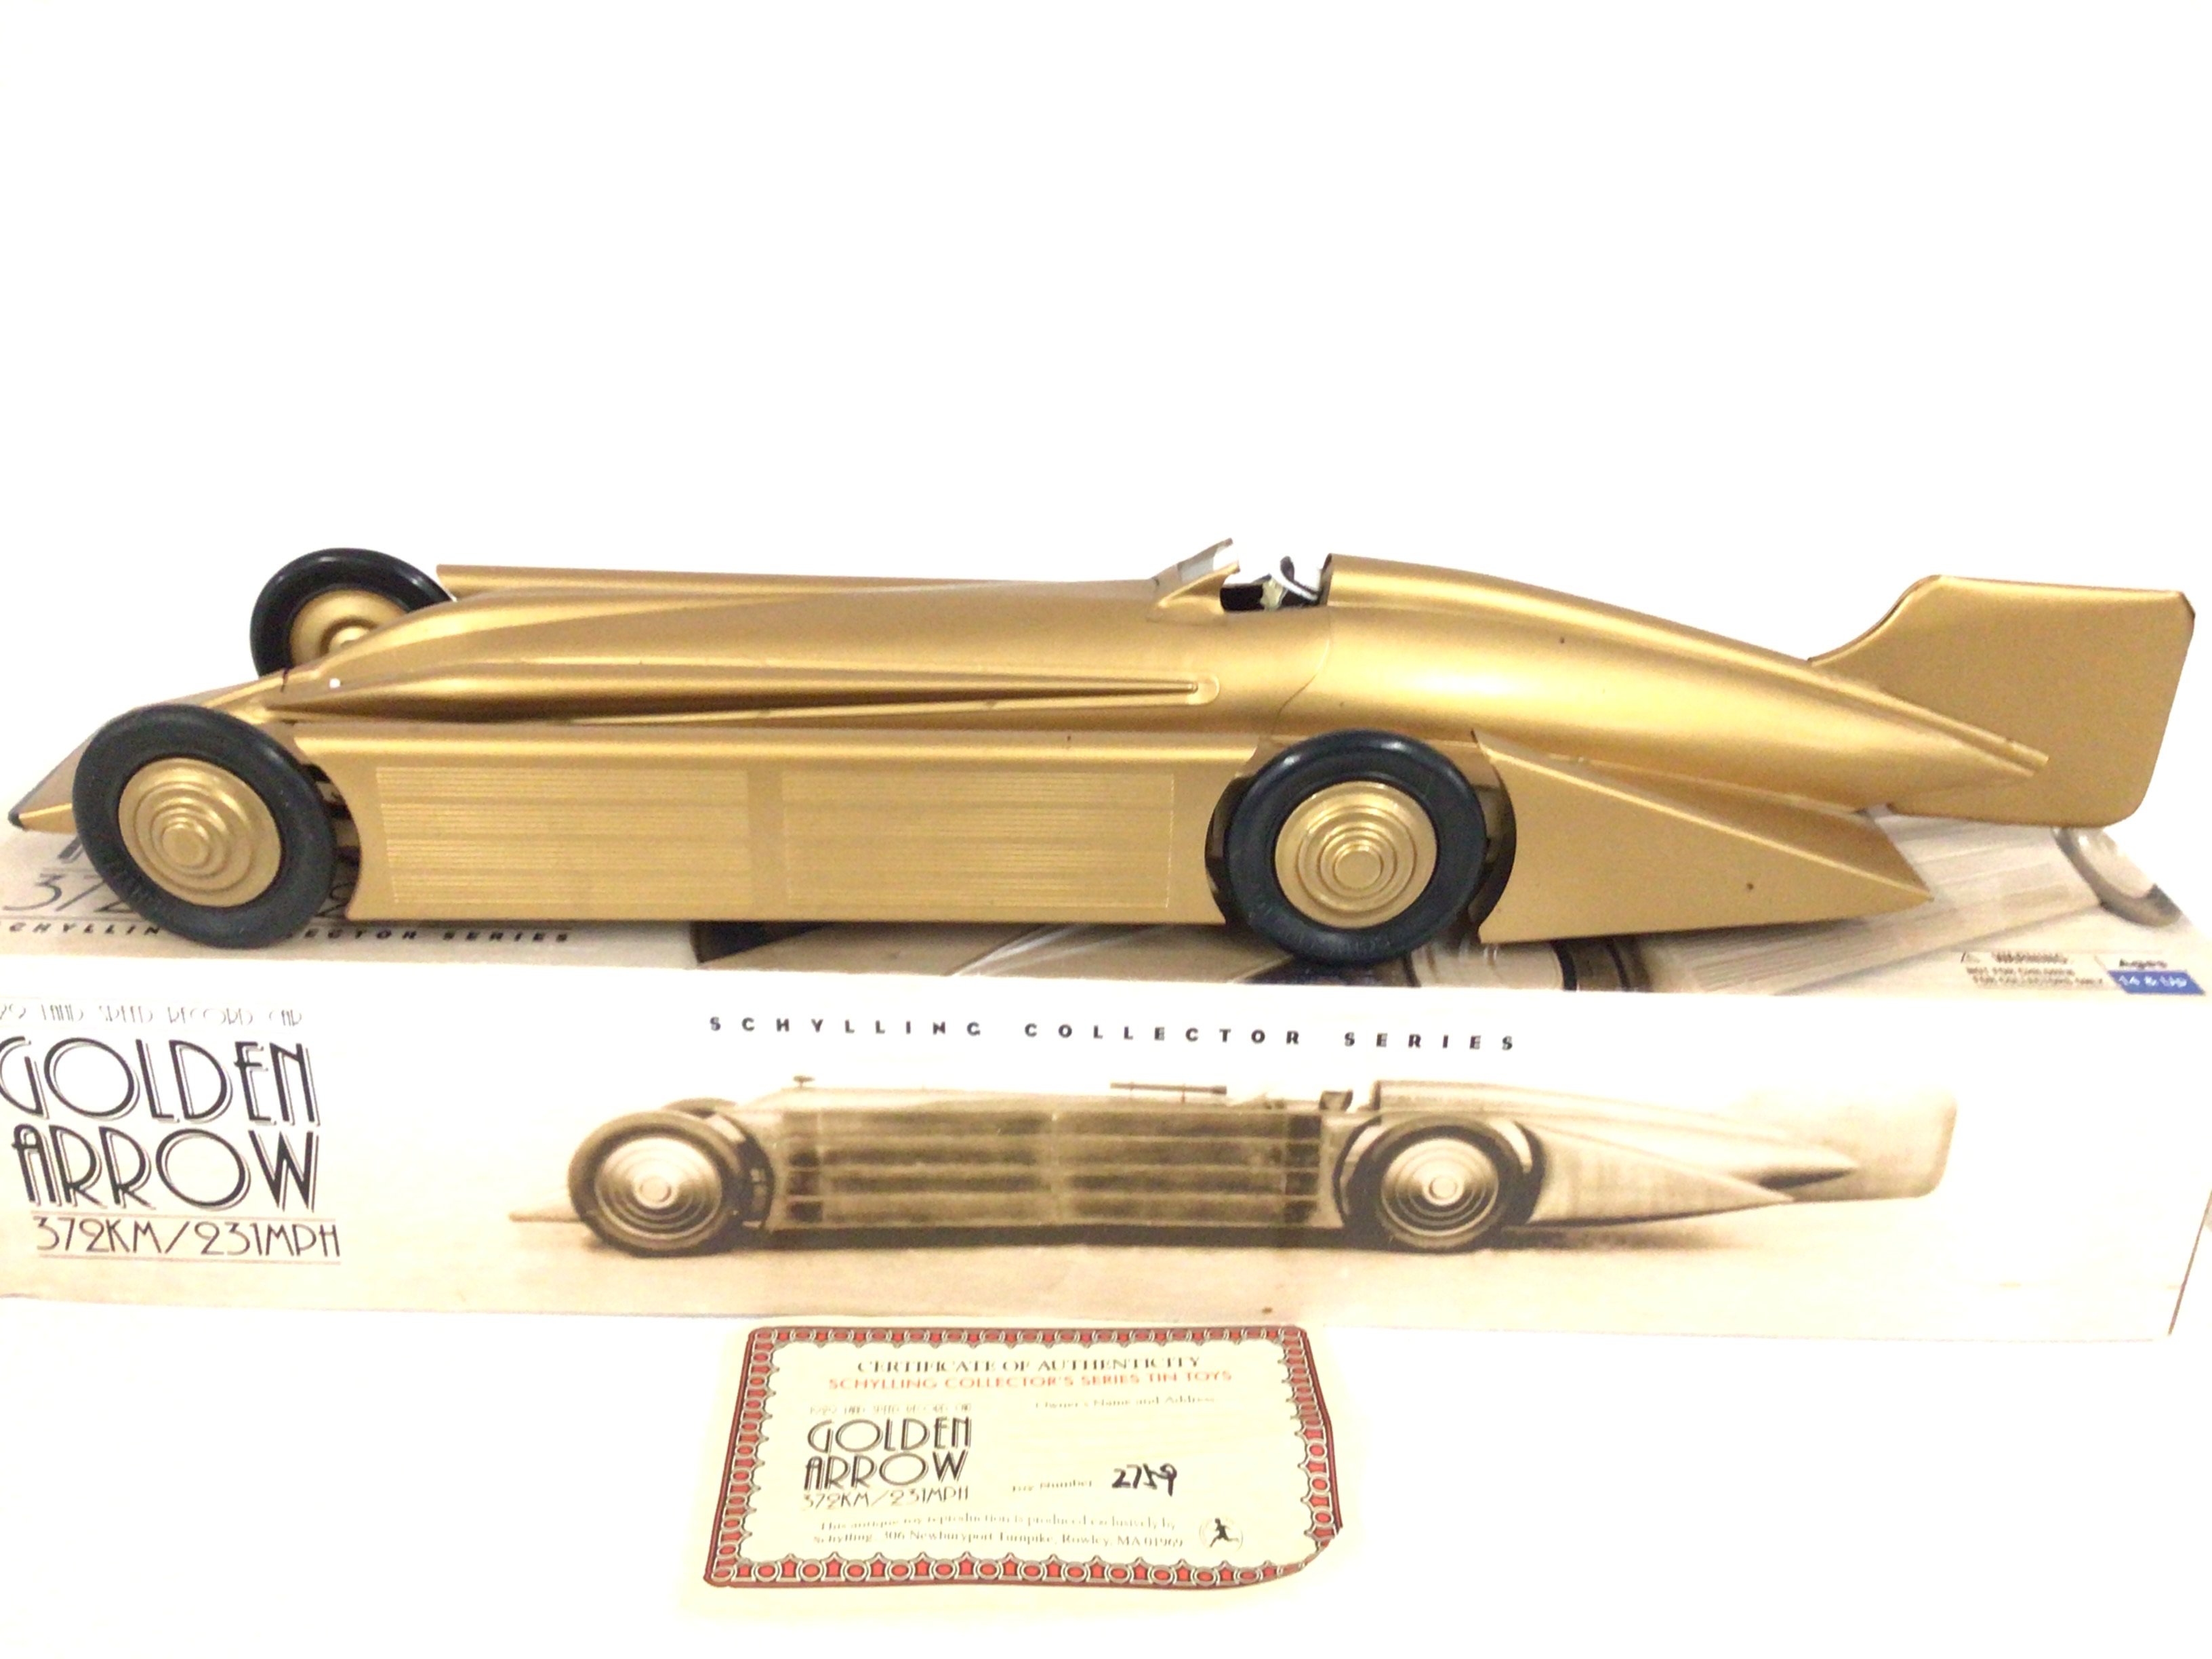 A Boxed Schylling Golden Arrow. - Image 3 of 3